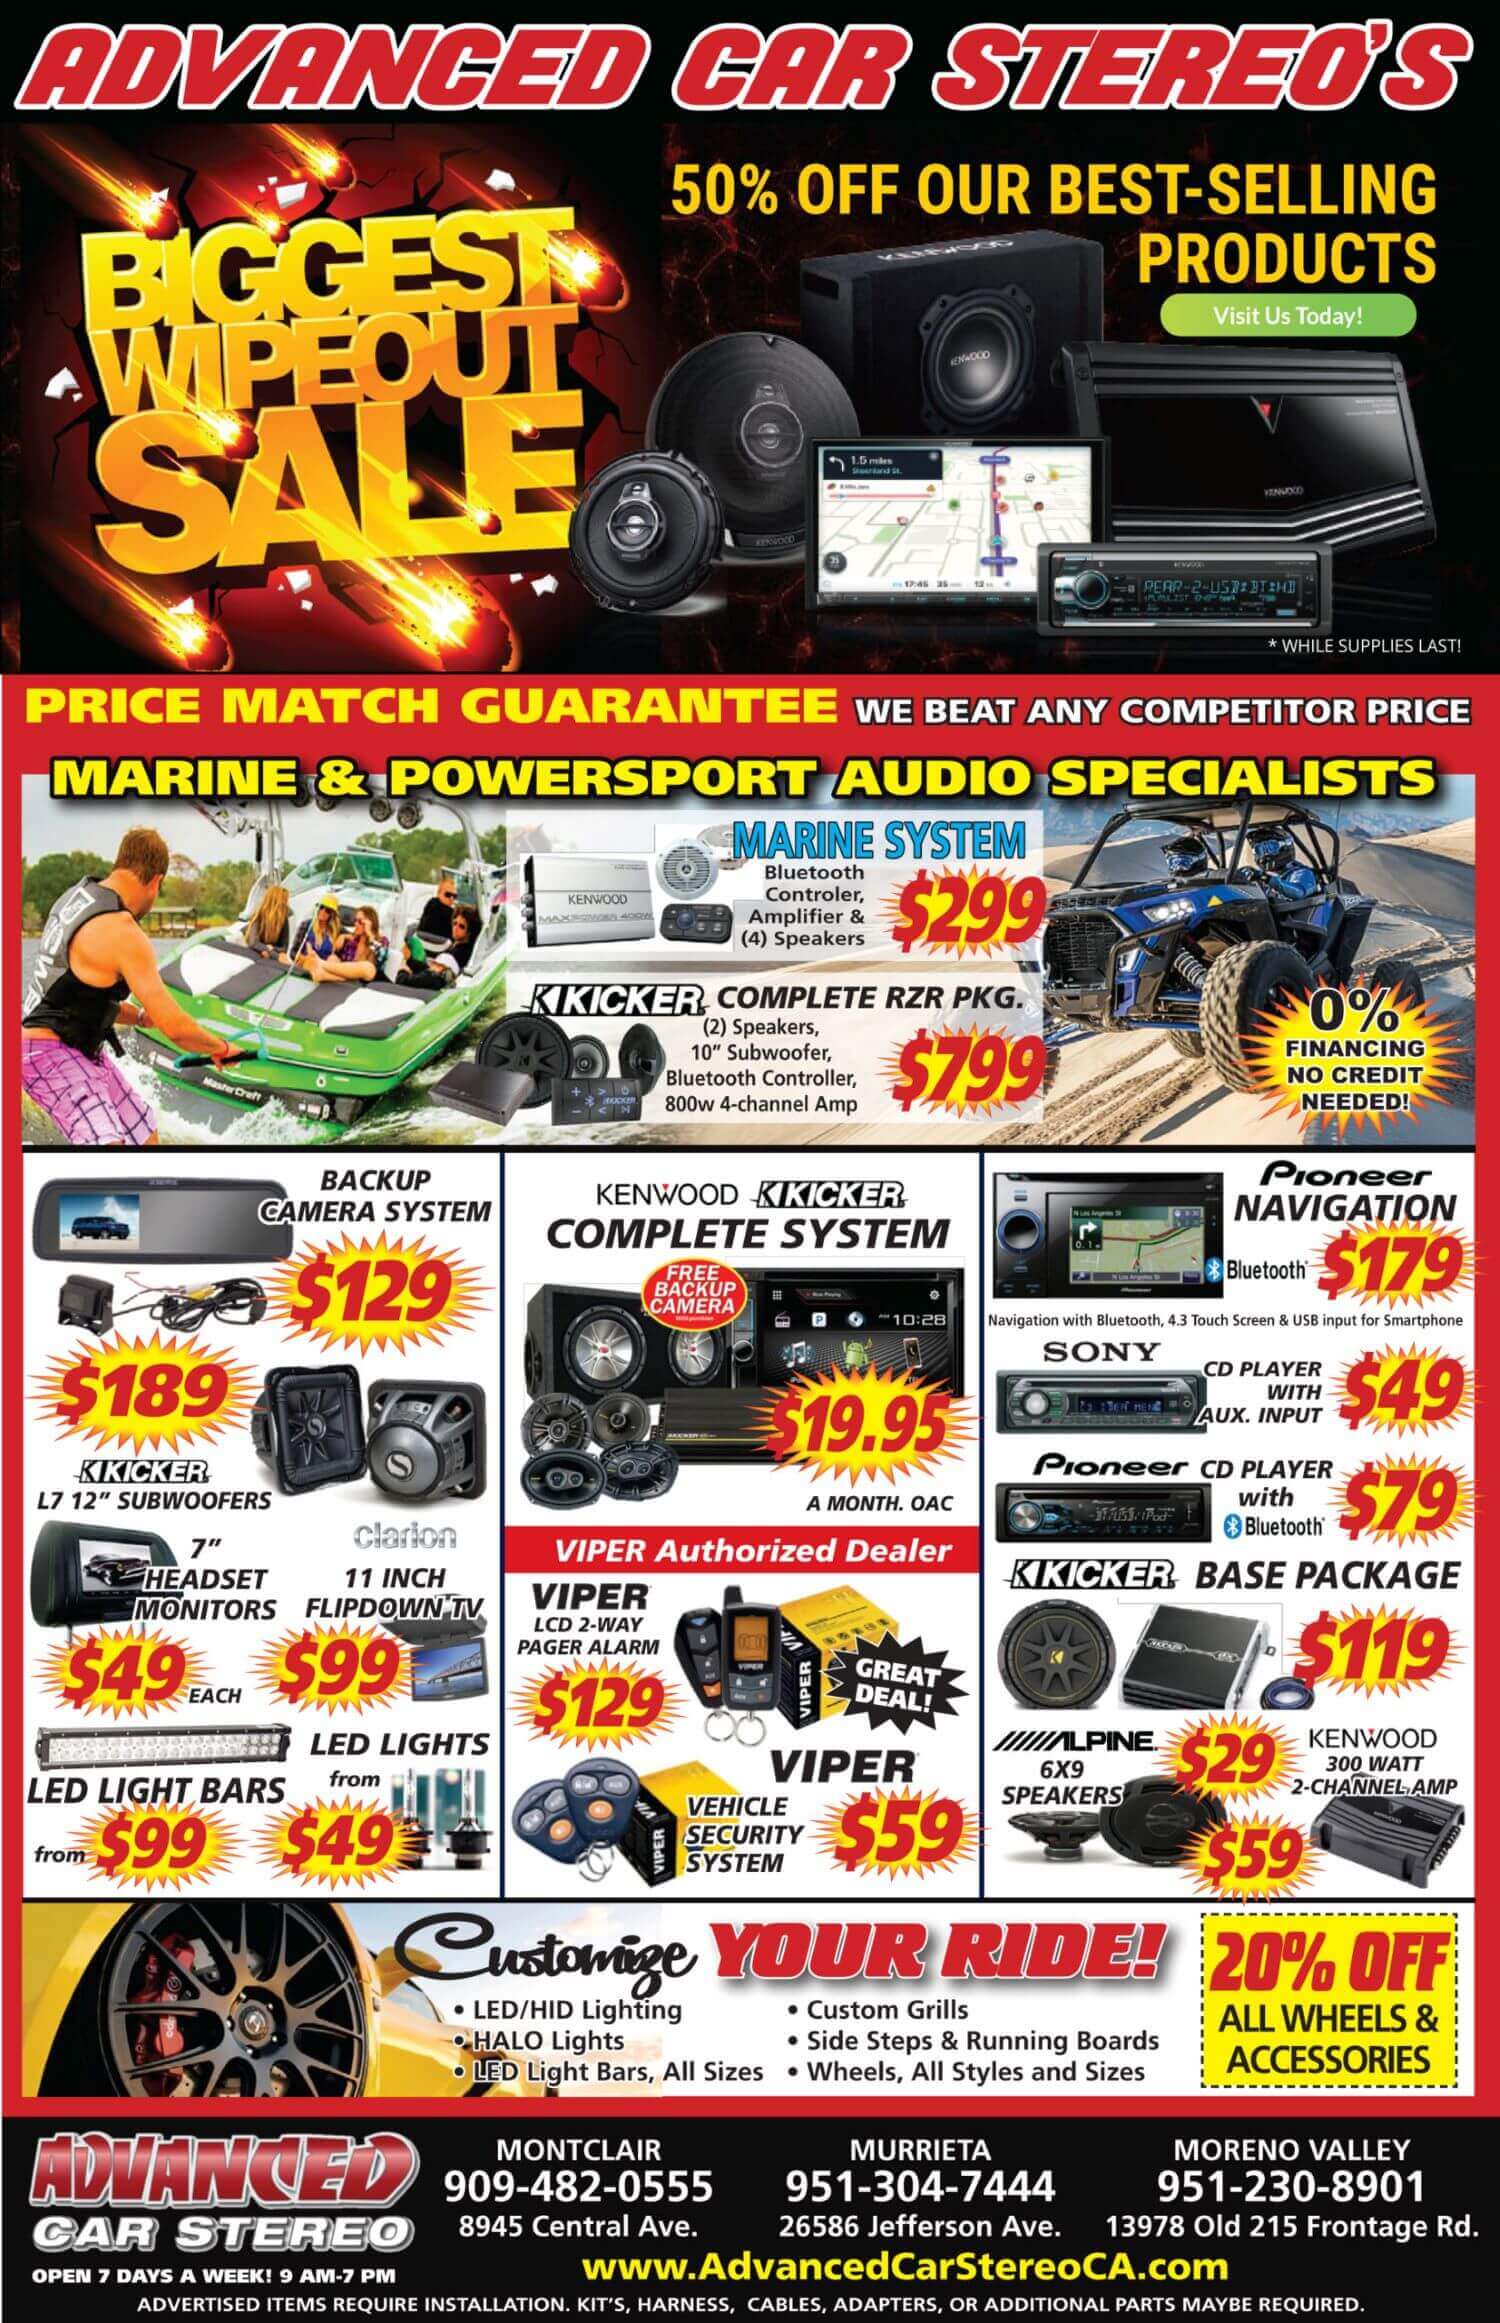 A flyer for the marine and powersports equipment sale.